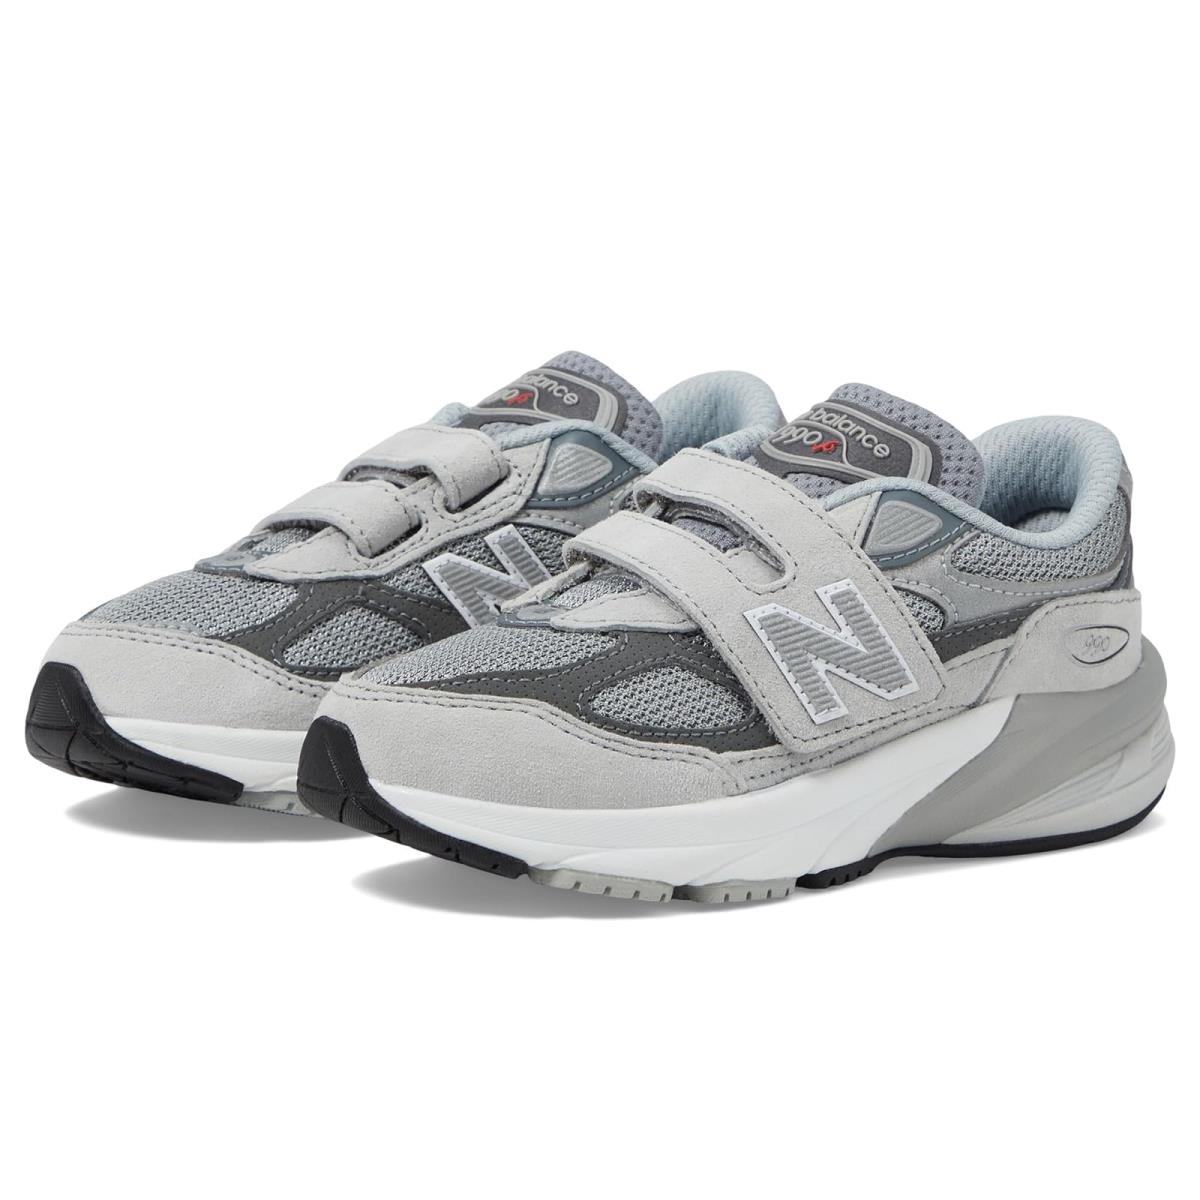 Boy`s Sneakers Athletic Shoes New Balance Kids 990v6 Little Kid Grey/Silver 1